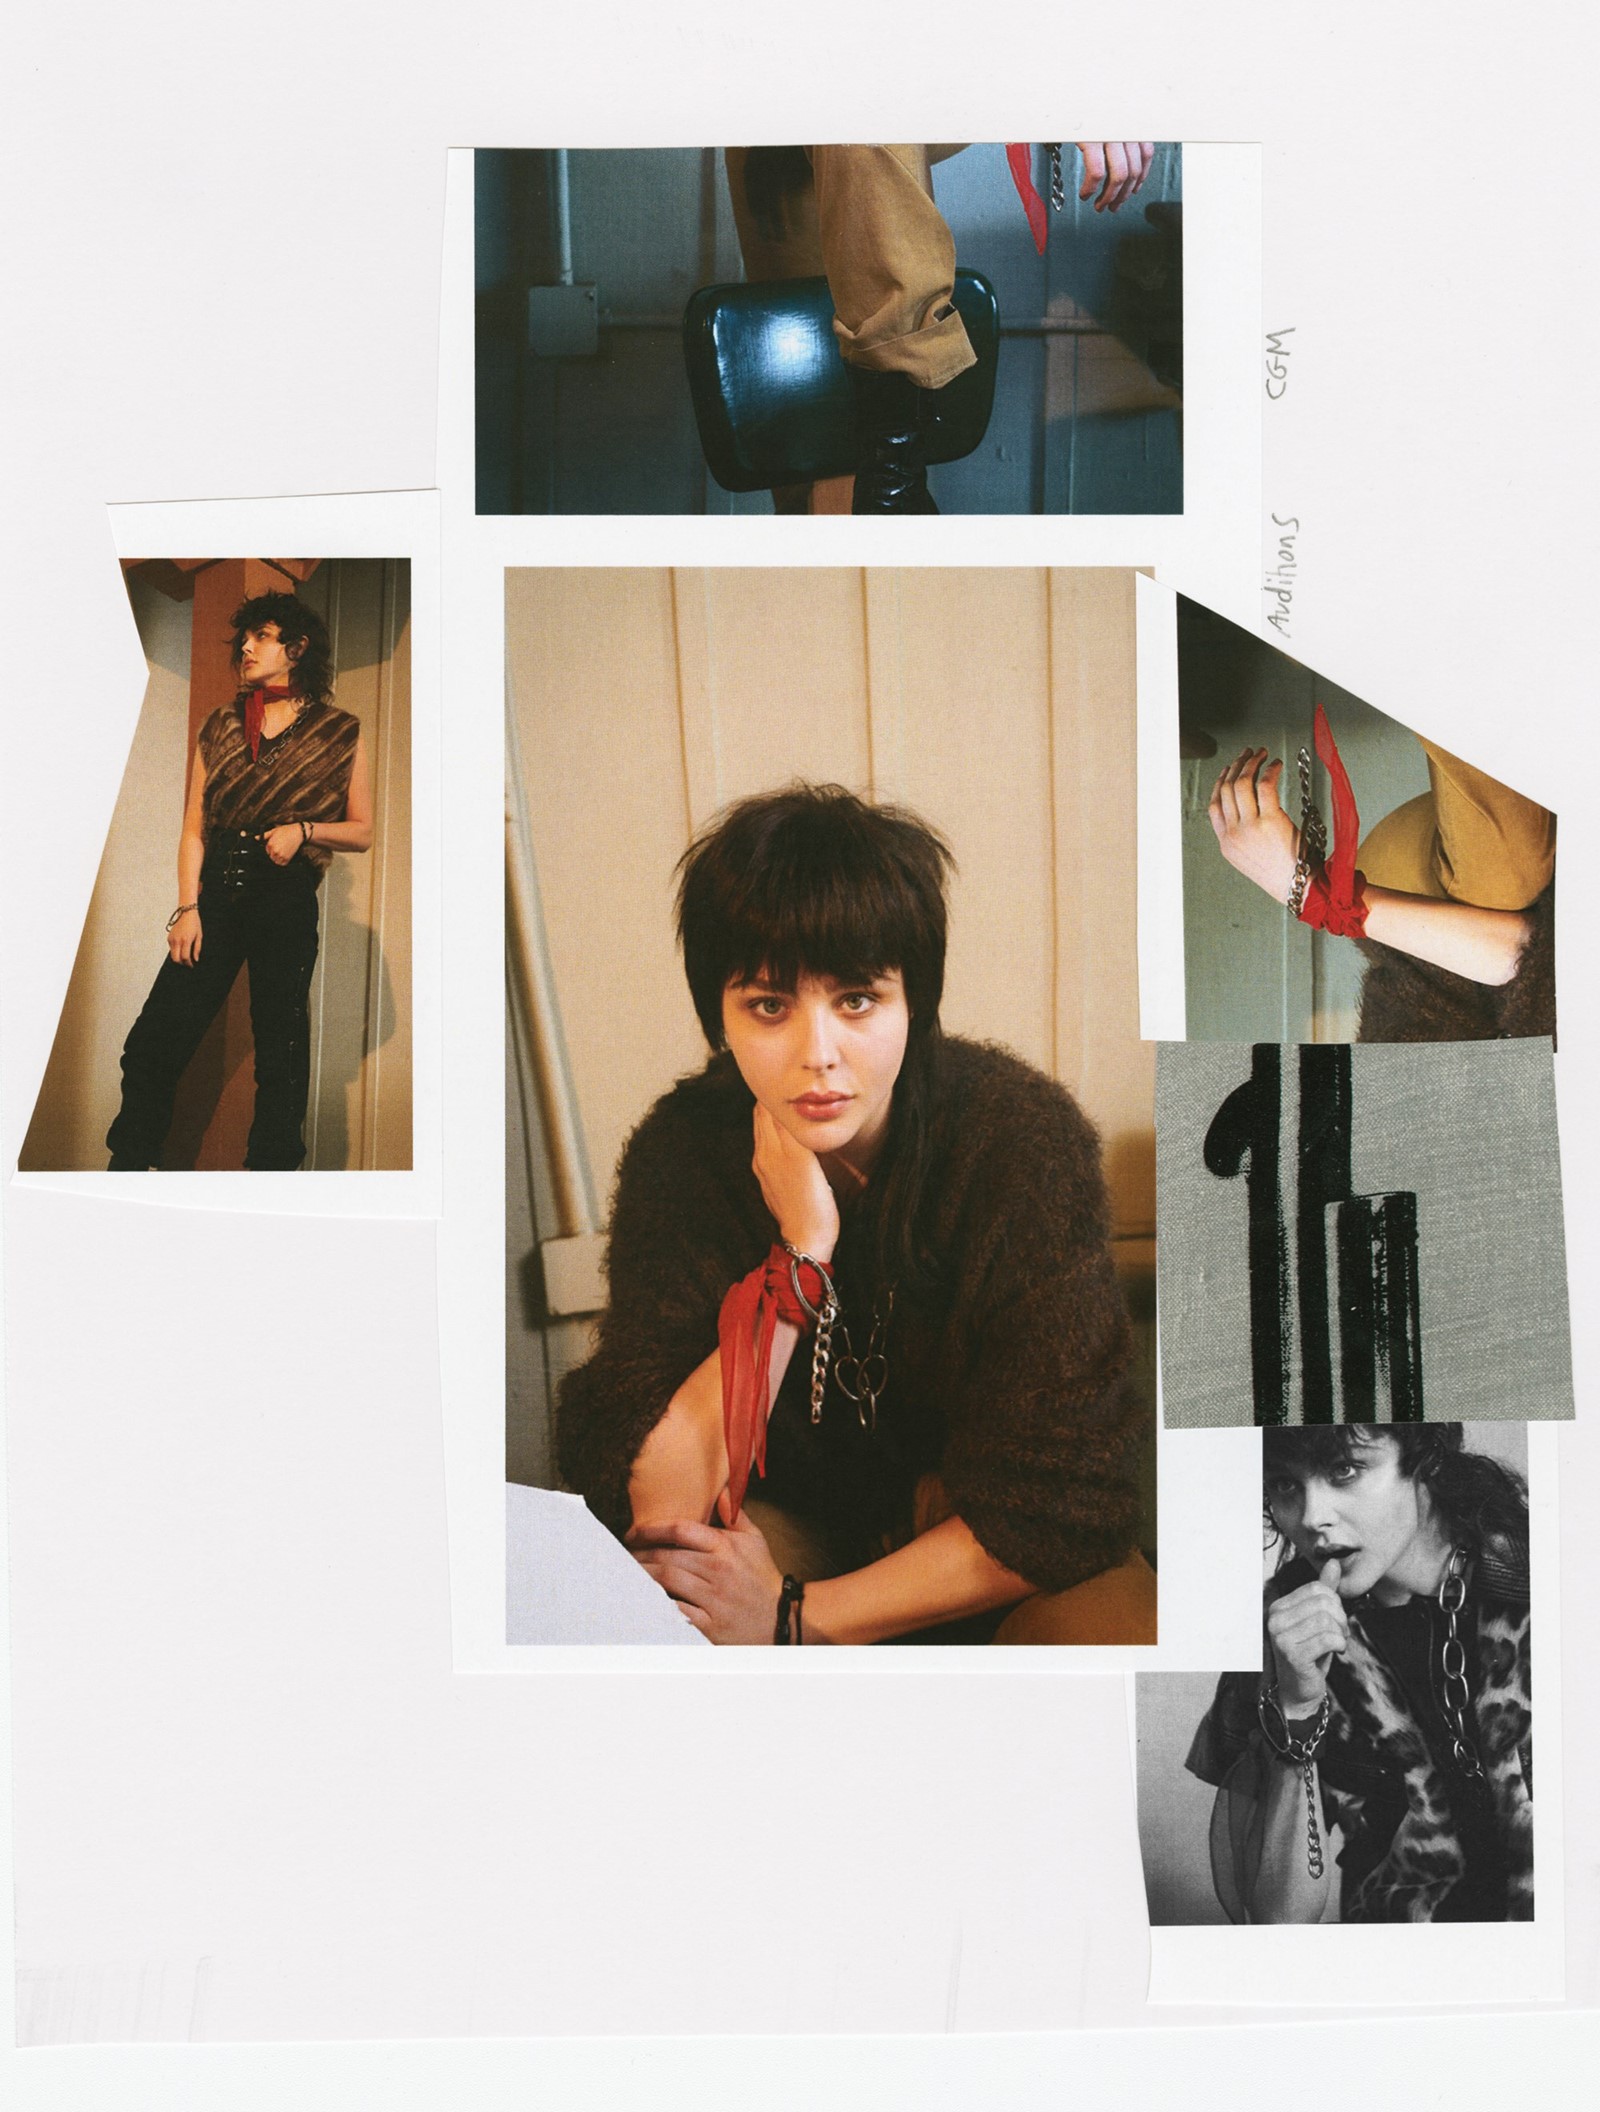 Photography by Collier Schorr, Styling by Katie Shillingford